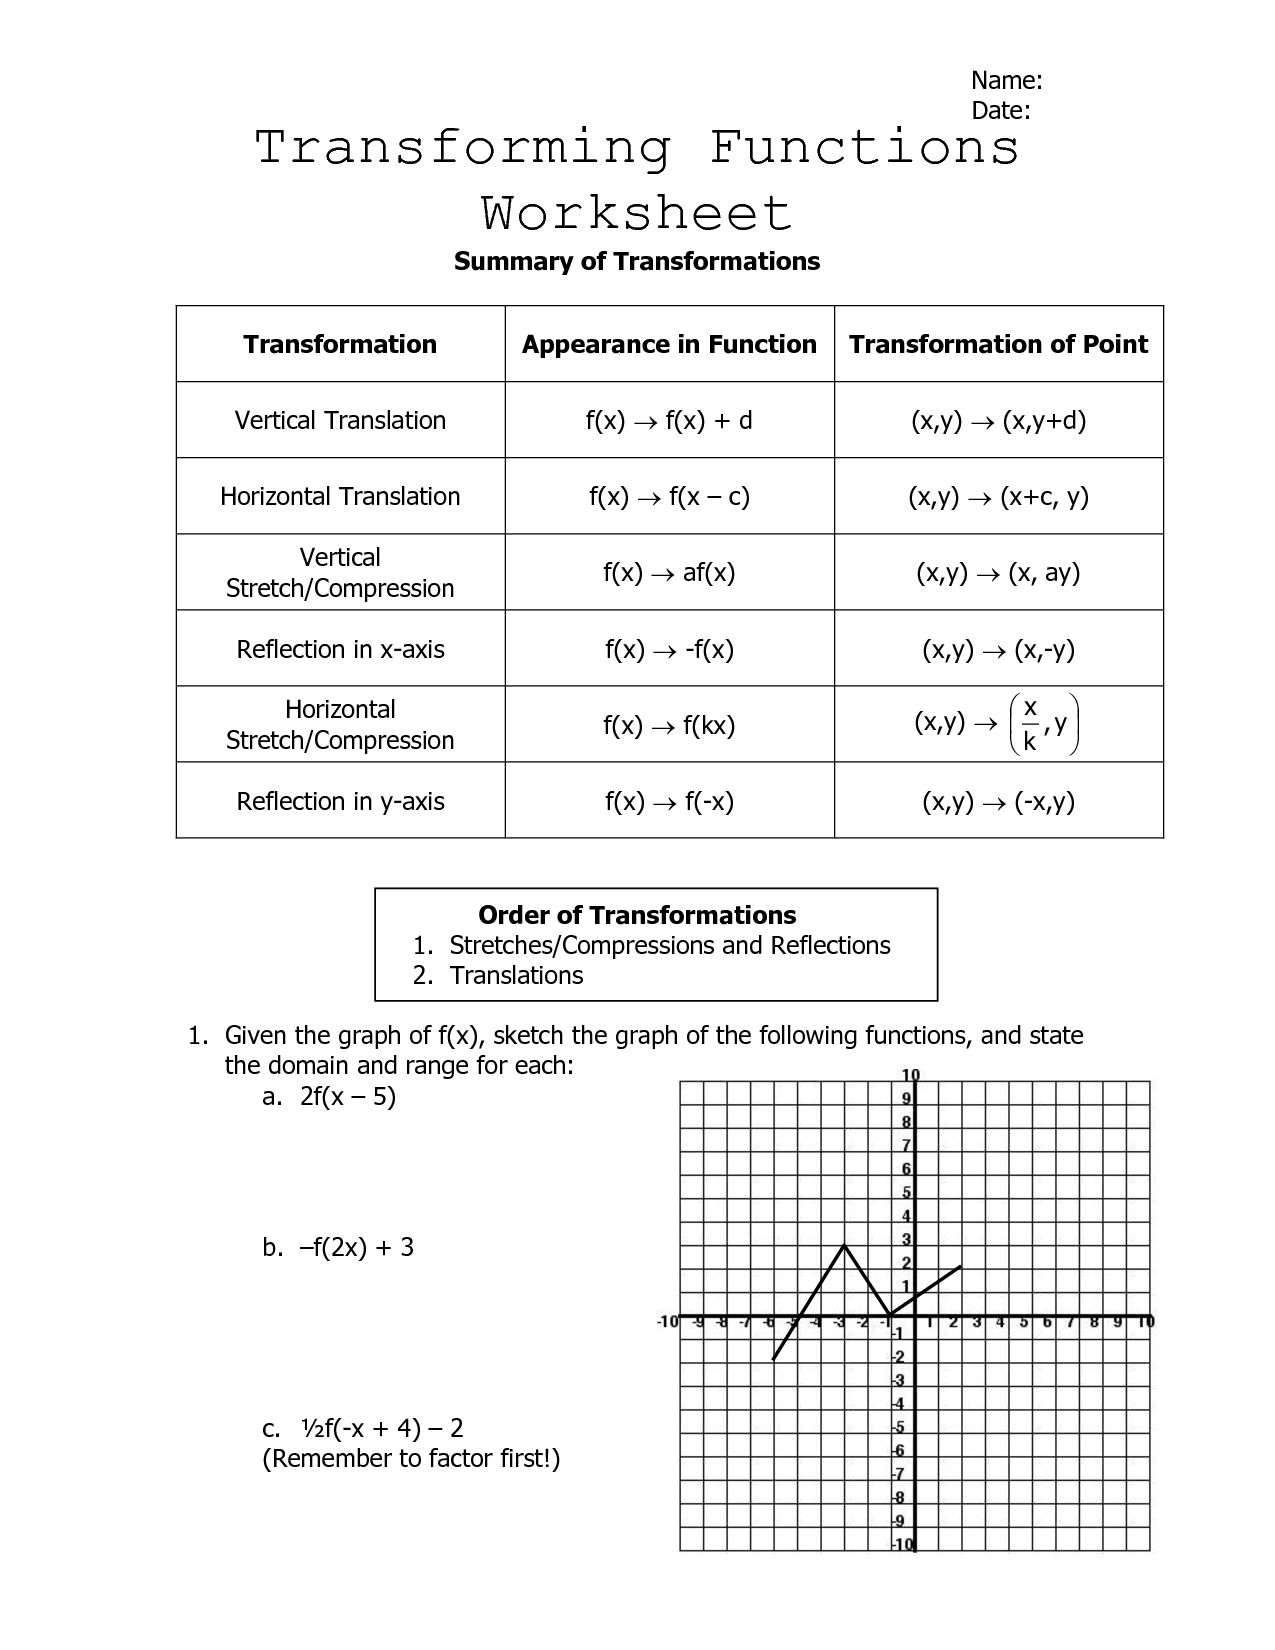 10-best-images-of-graphing-functions-worksheet-graphing-trig-functions-cheat-sheet-graphing